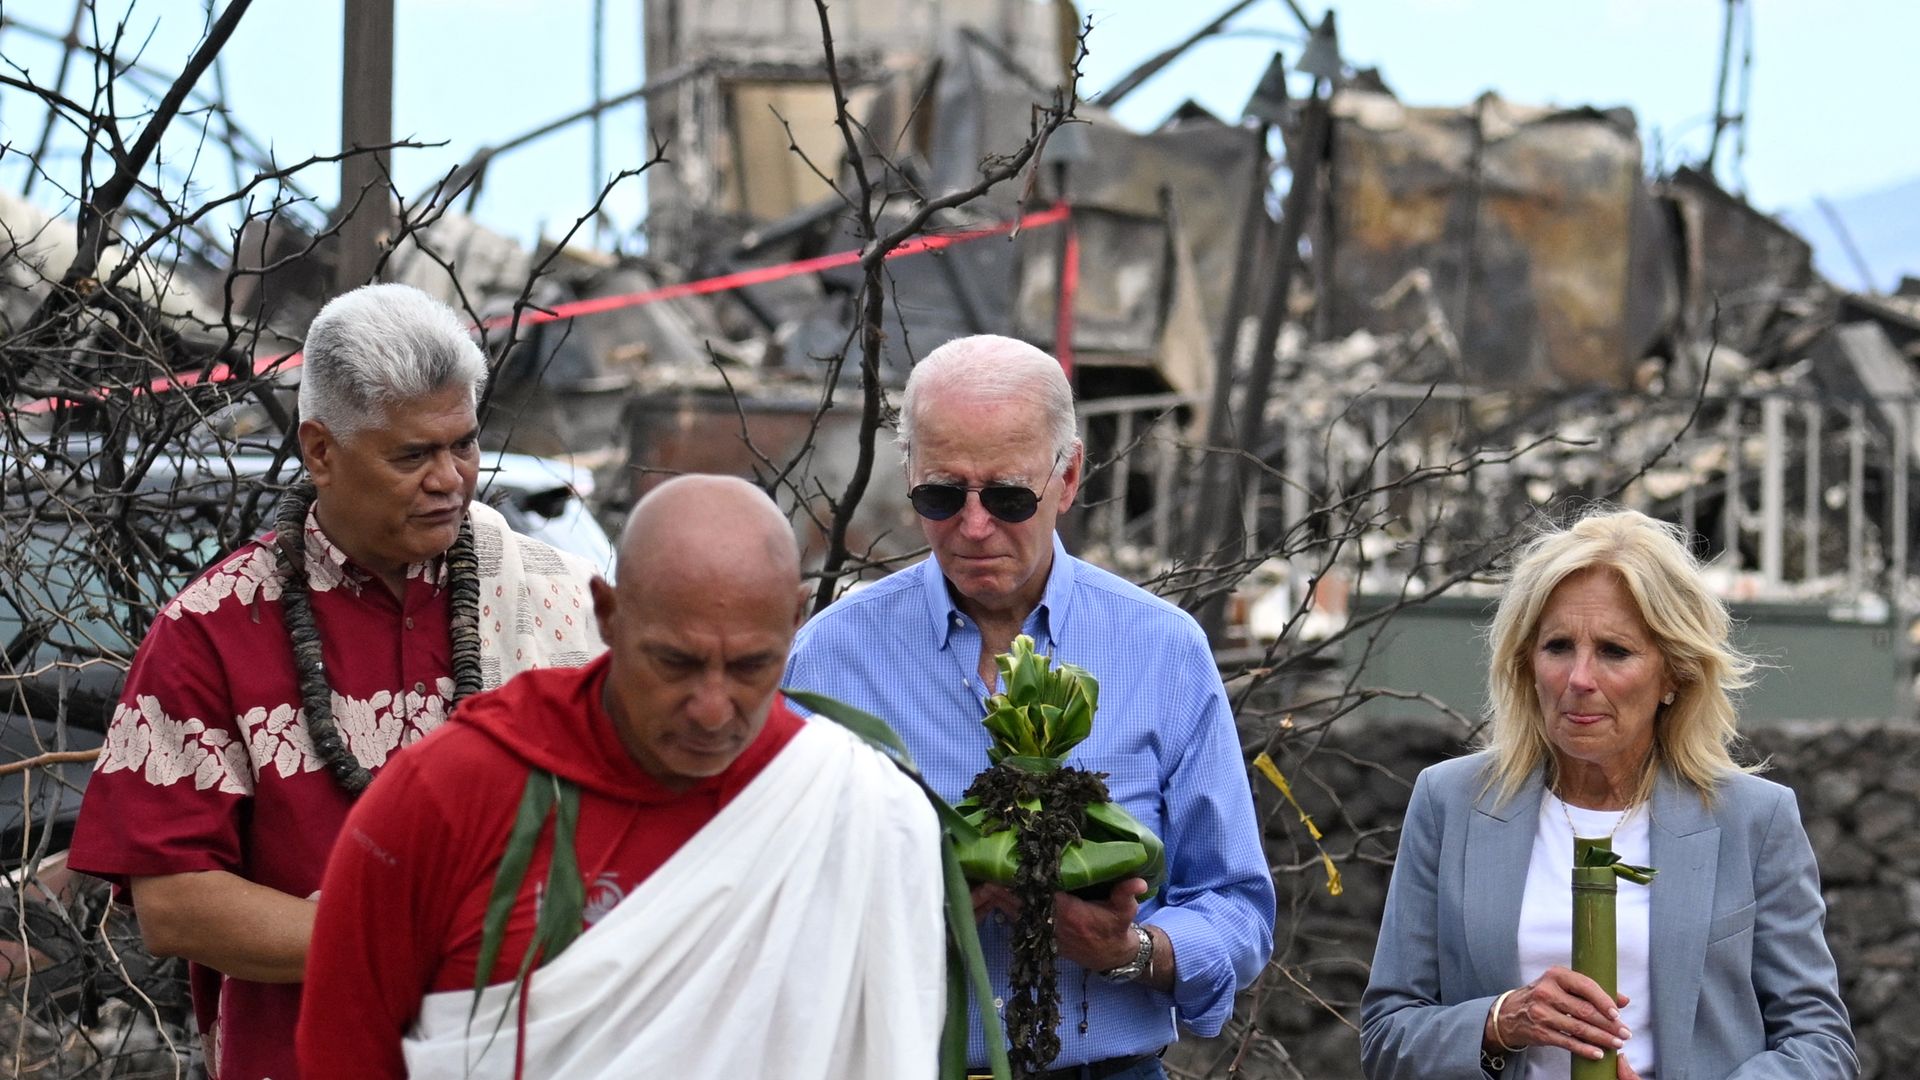 President Joe Biden and US First Lady Jill Biden participate in a blessing ceremony with the Lahaina elders at Moku'ula following wildfires in Lahaina, Hawaii on August 21, 2023. The Bidens are expected to meet with first responders, survivors, and local officials following deadly wildfires in Maui.